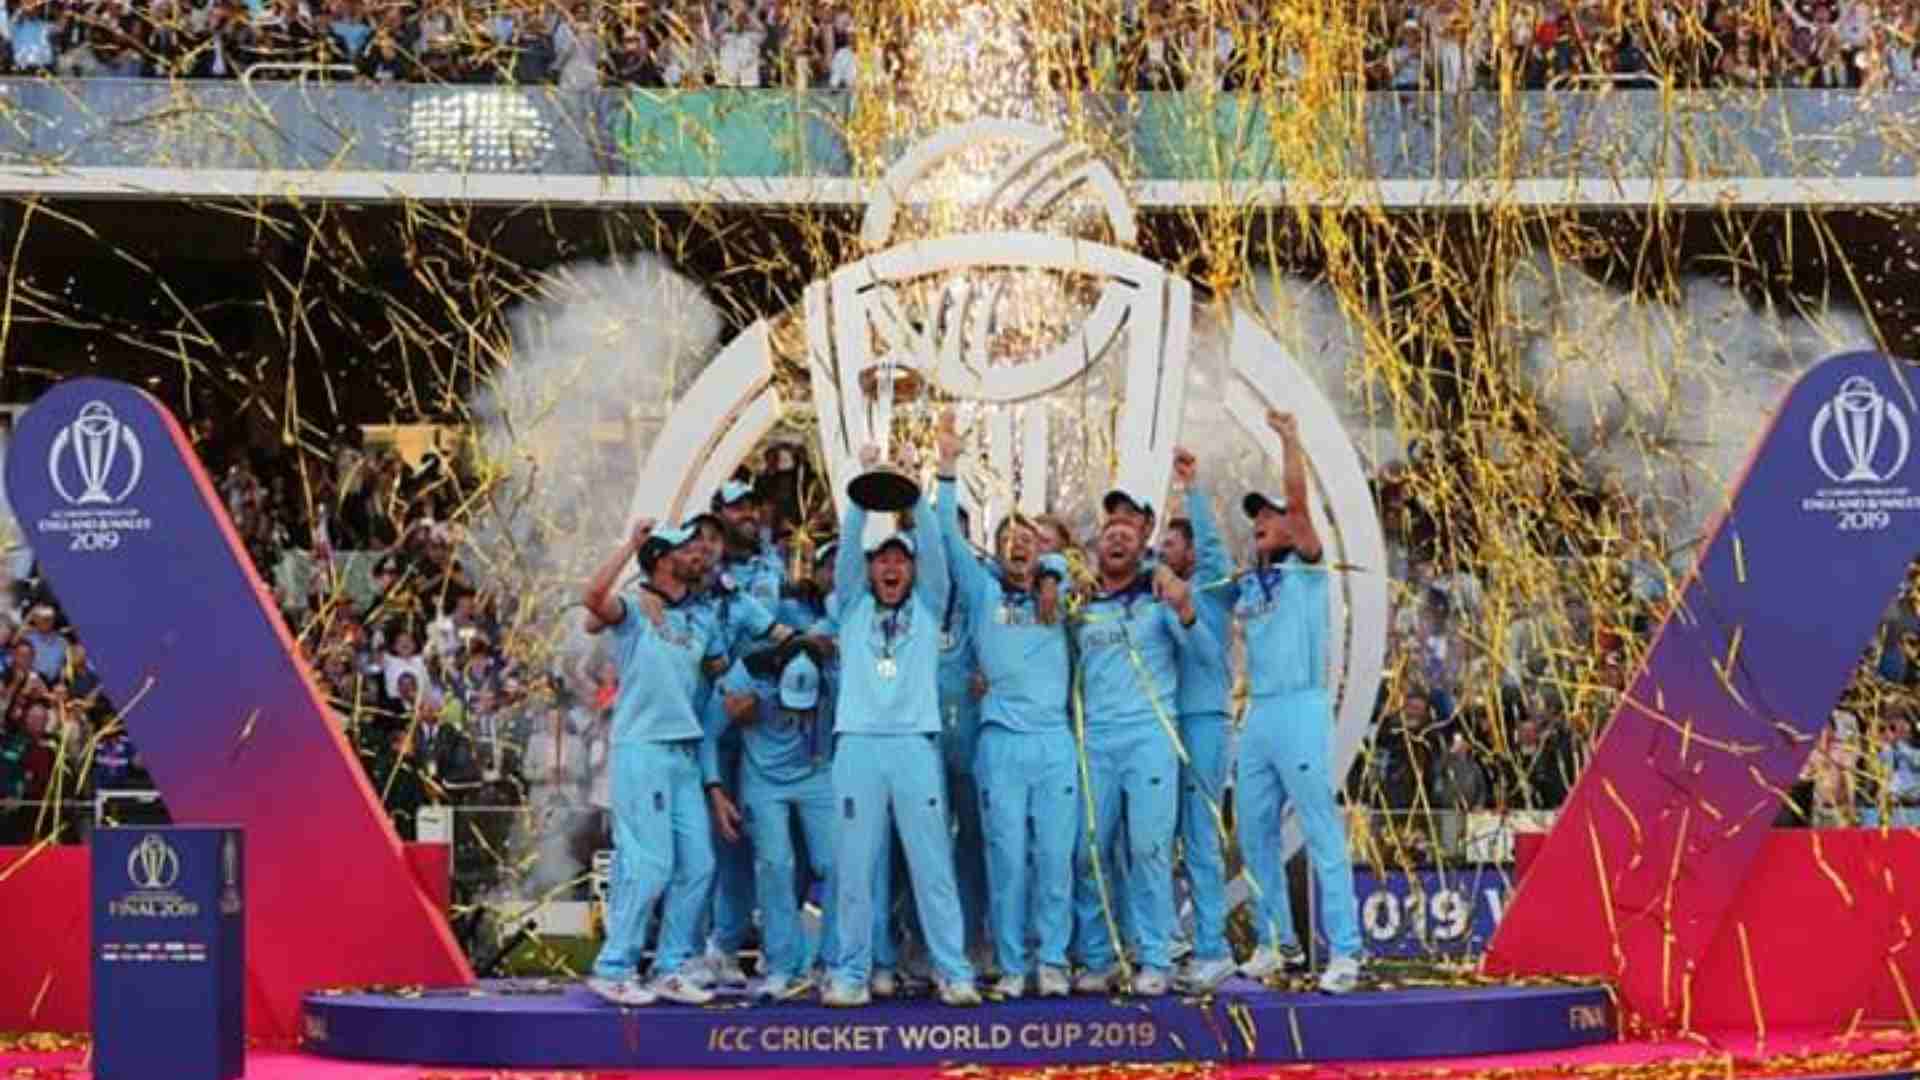 Champions Trophy back, T20, 50over WC expanded in 202431 cycle